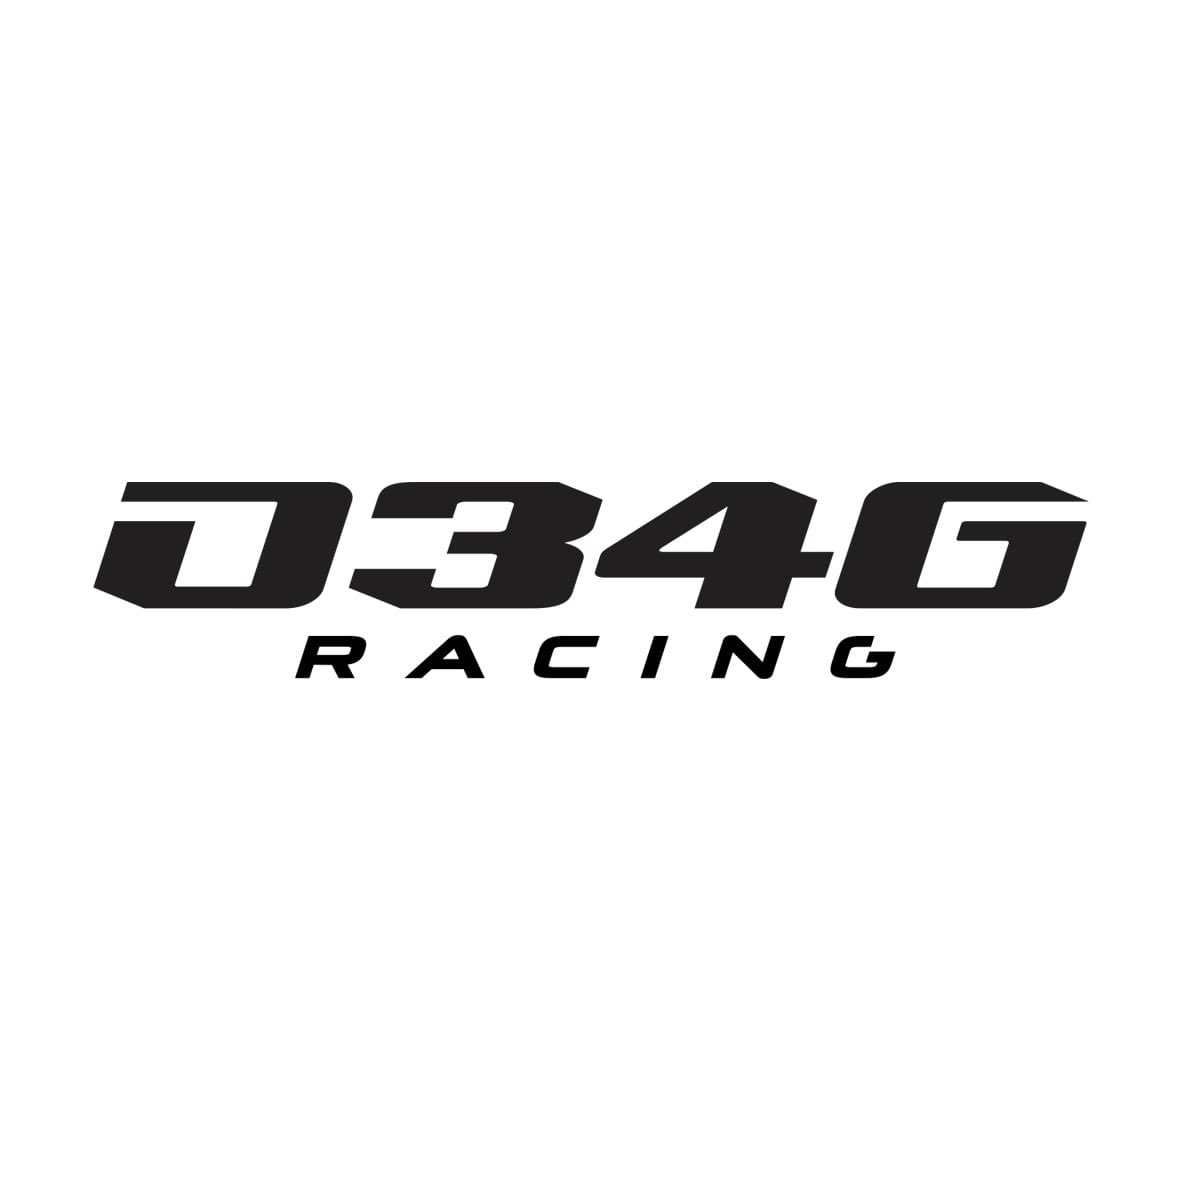 A huge thanks to Davide Giugliano and the D34G team for giving me this opportunity to join them. I’ve been very impressed when seeing their team setup, and their Ducati V2 looks incredible! I’ll be looking to make my adaption to the bike as quickly as possible and 1/2.